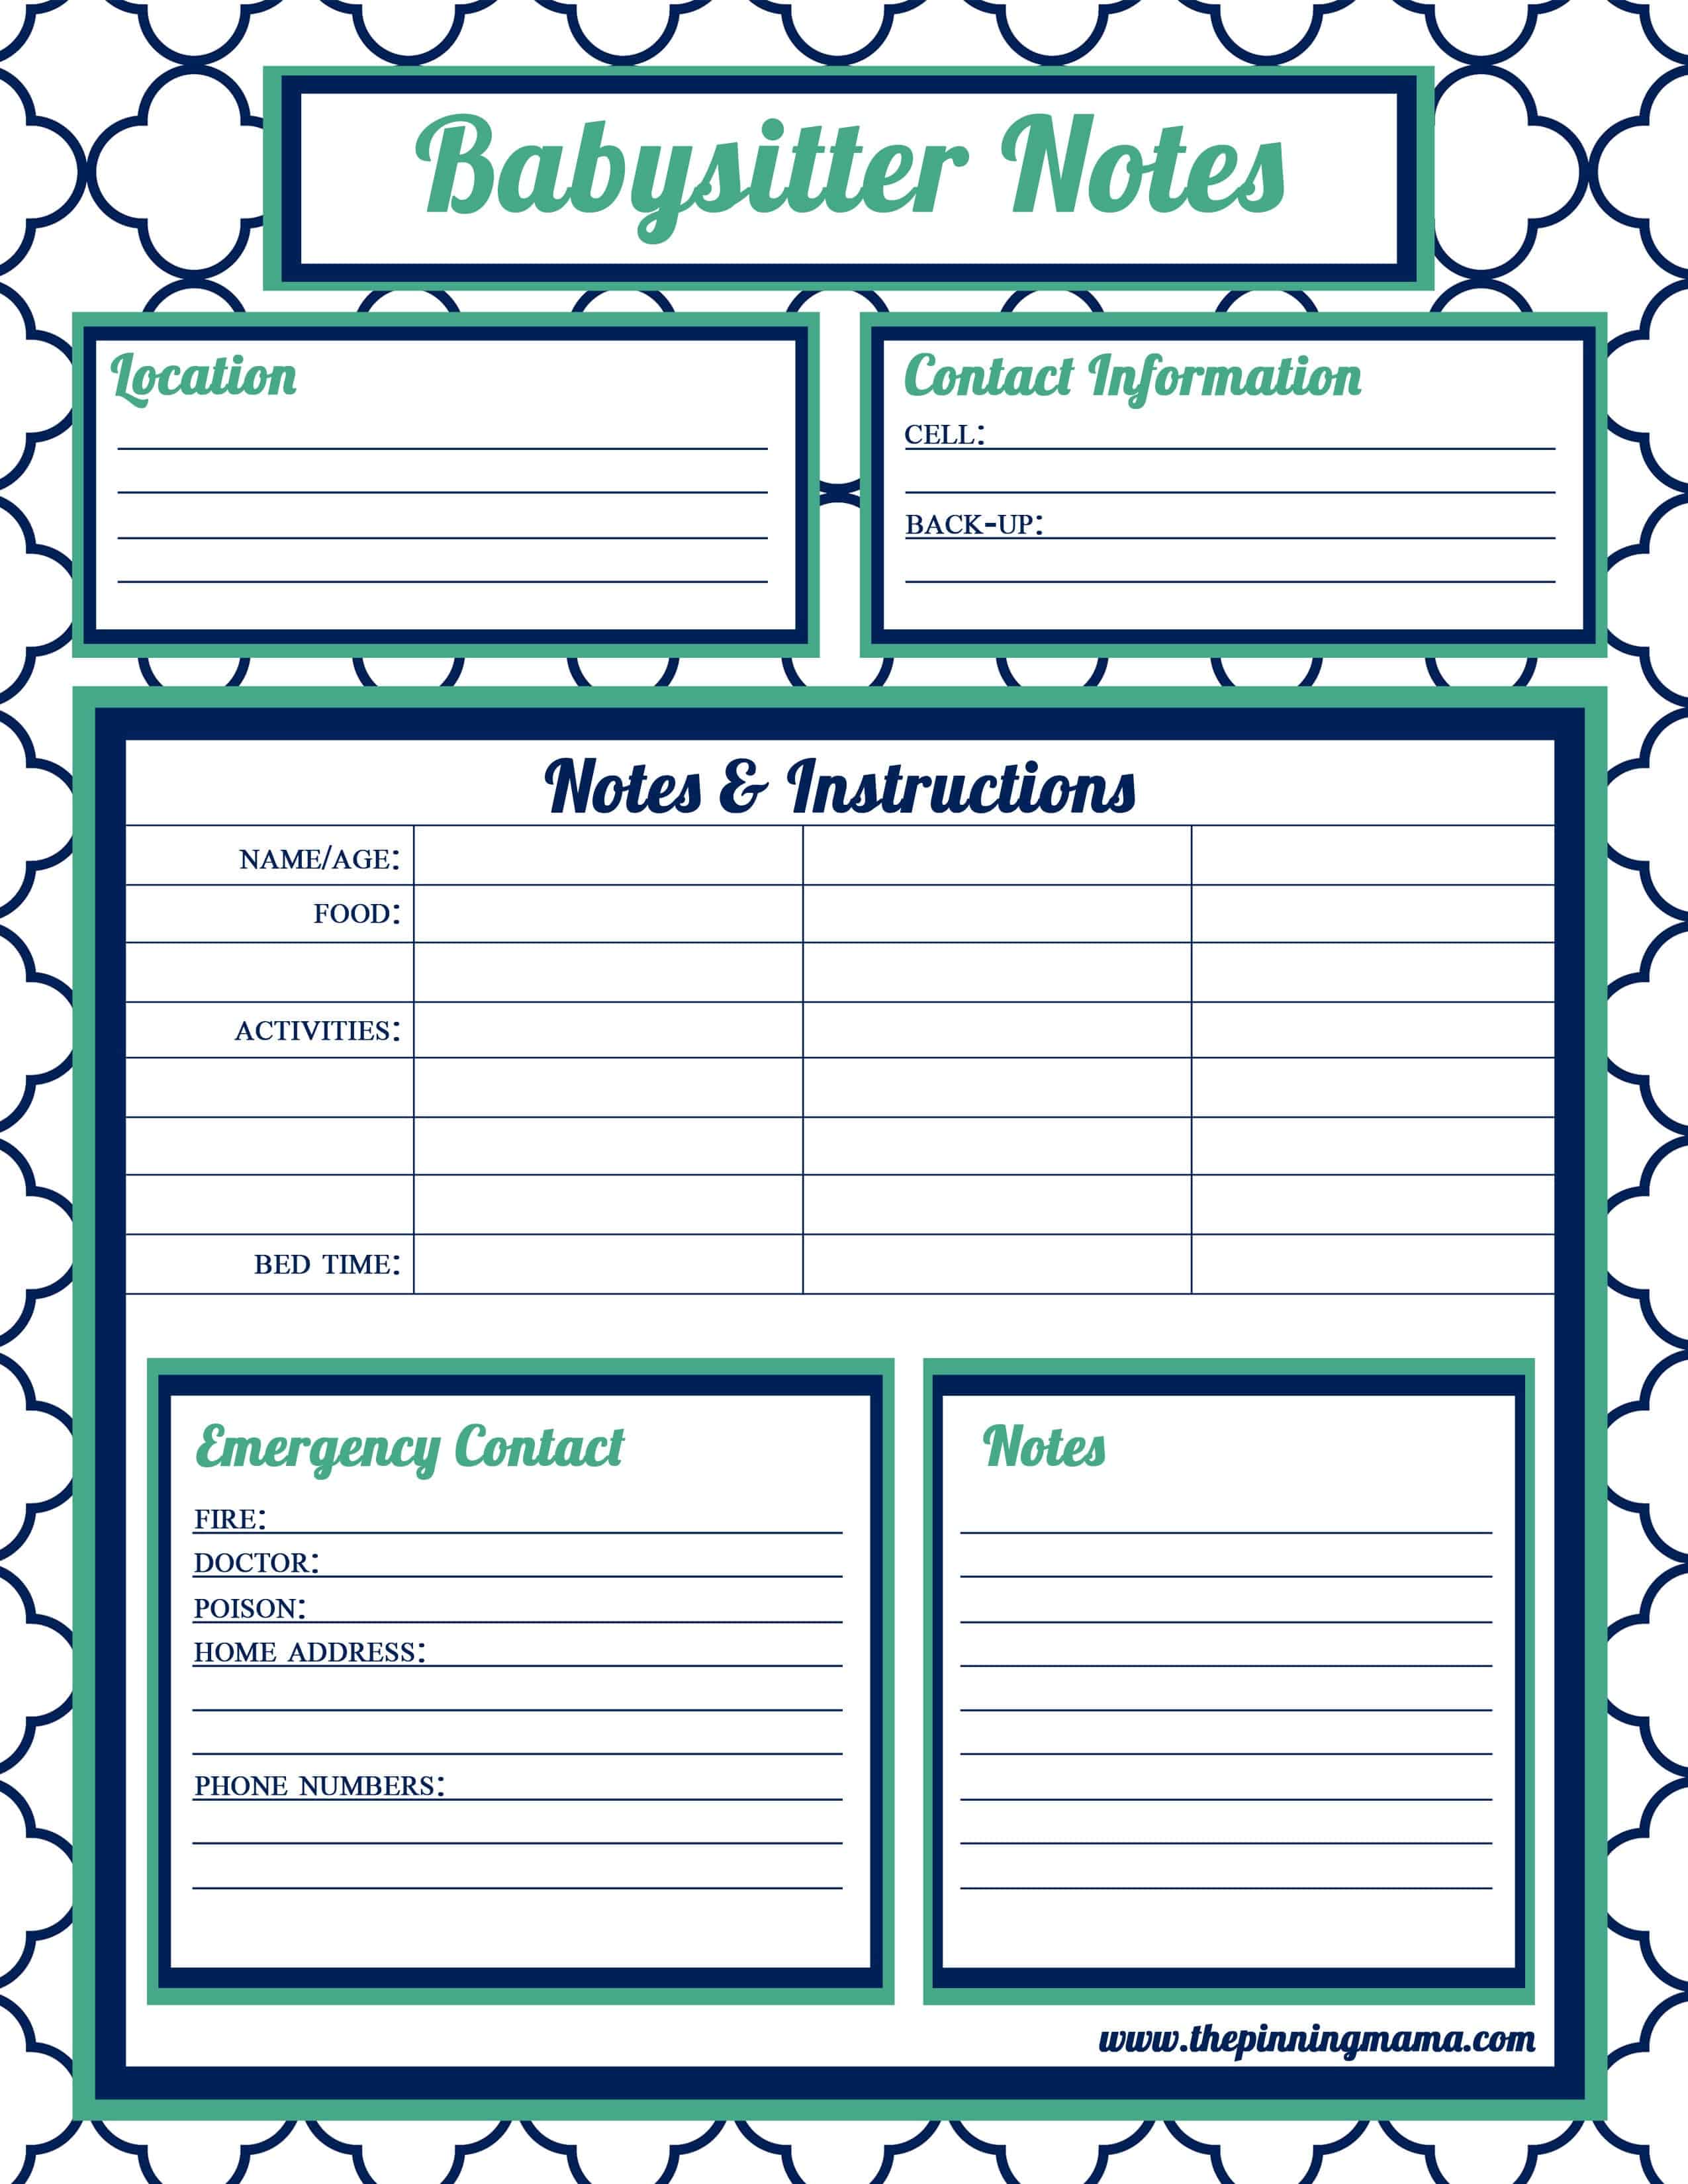 nothing-found-for-babysitter-information-printable